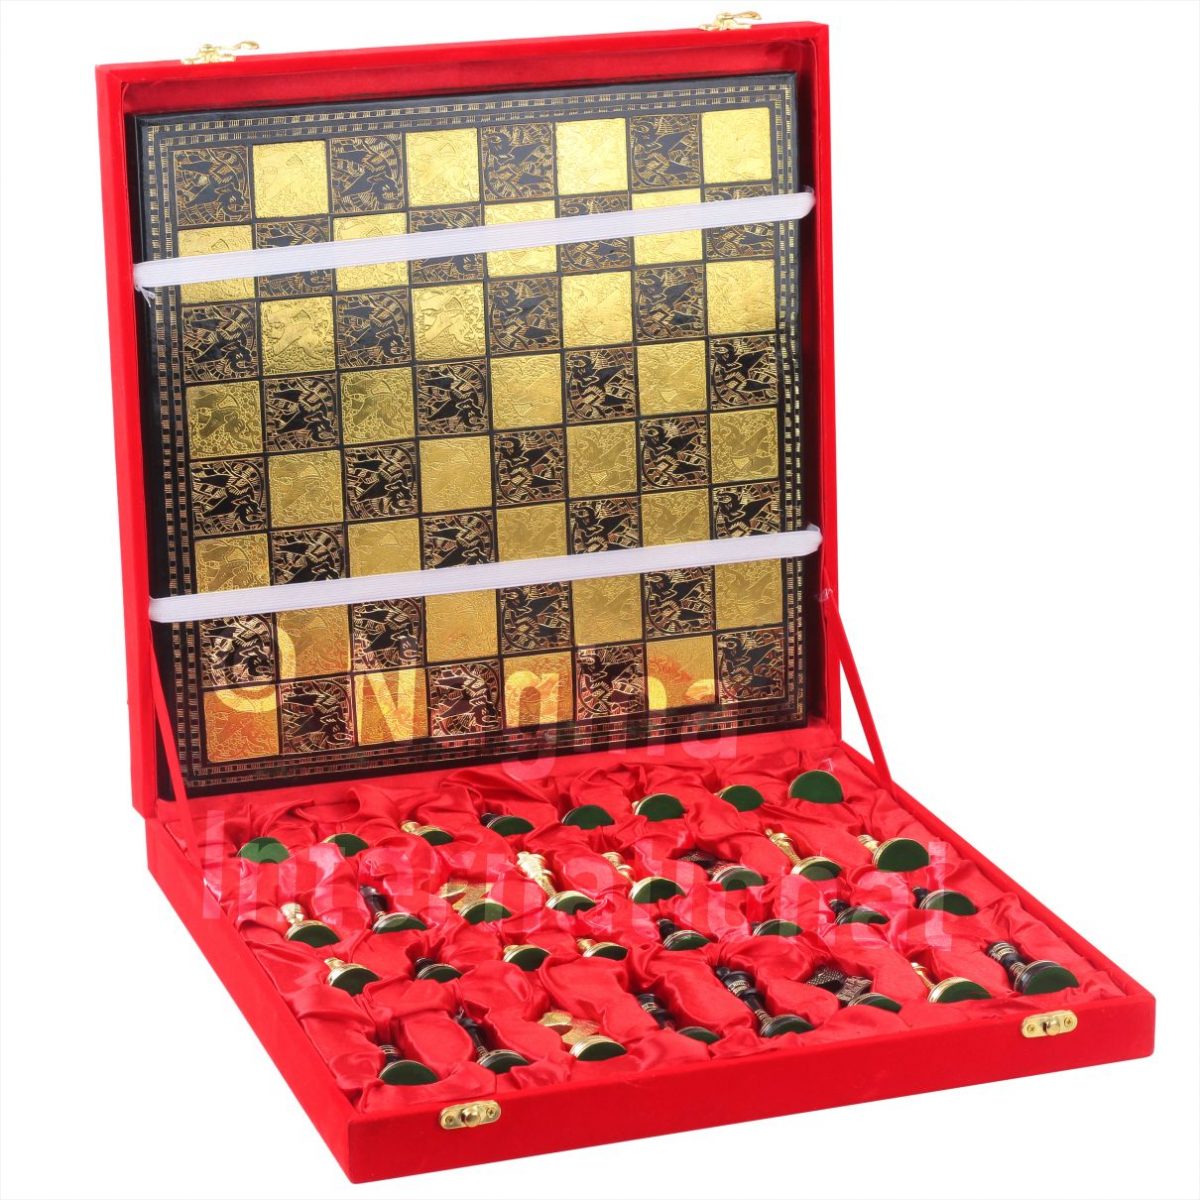 Buy 12 Solid Brass Classic Black Chess Set, Metal Chess Pieces with Large  Brass Board, Beautiful Handcrafted Set